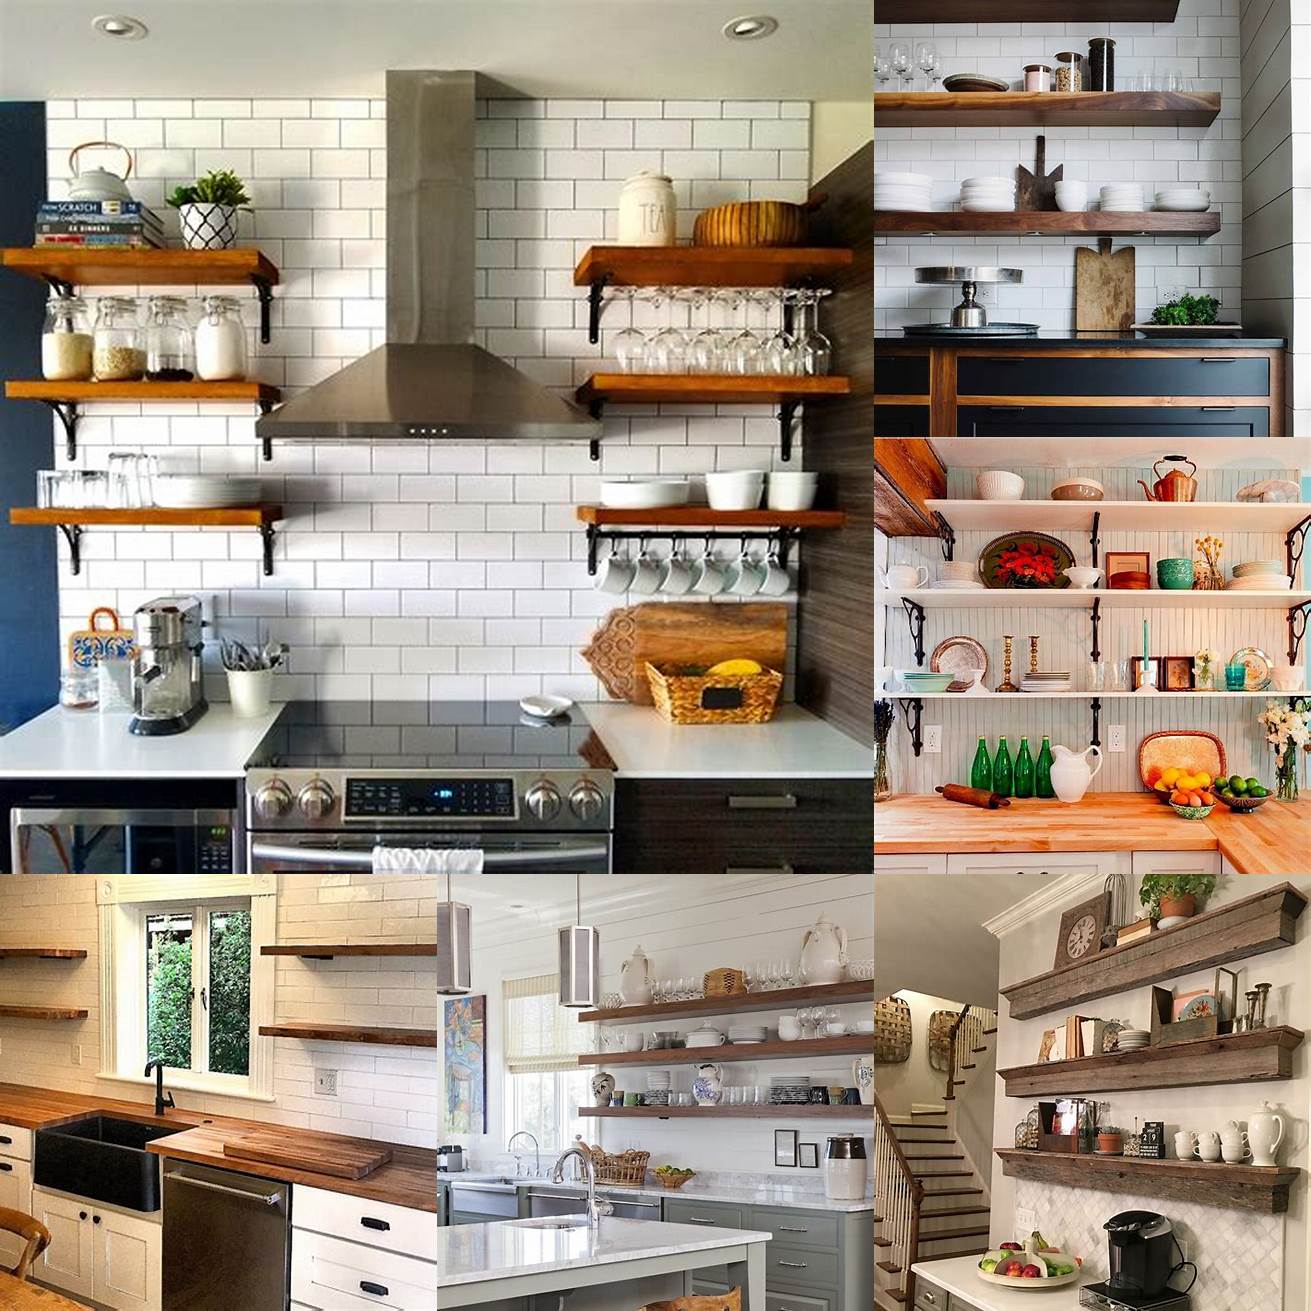 Wooden countertops and open shelving